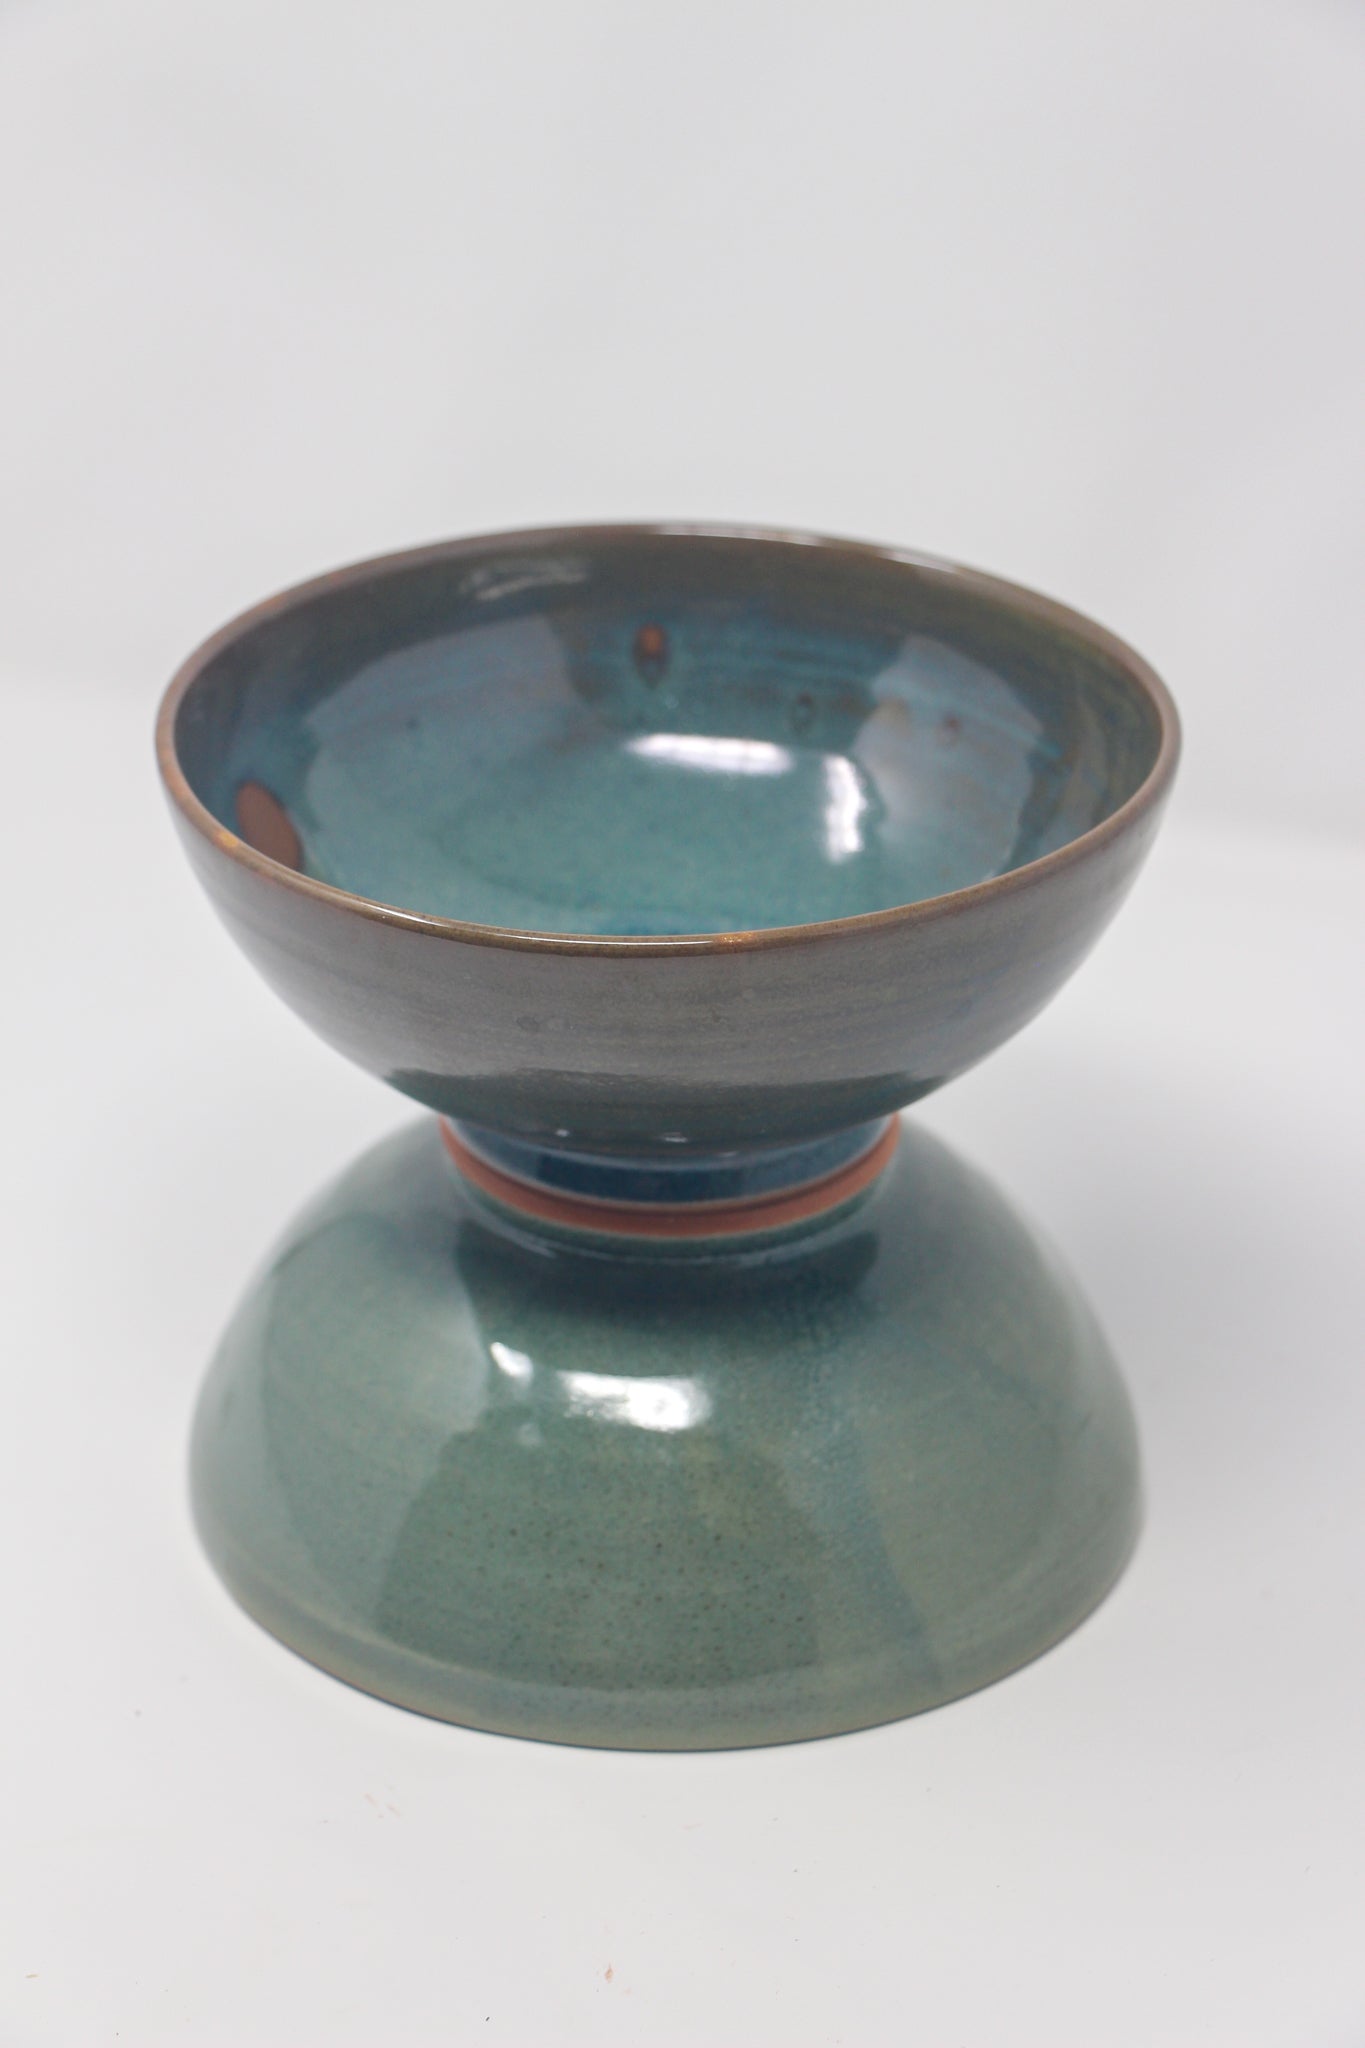 Pair of Bowls, Coppernican Sky